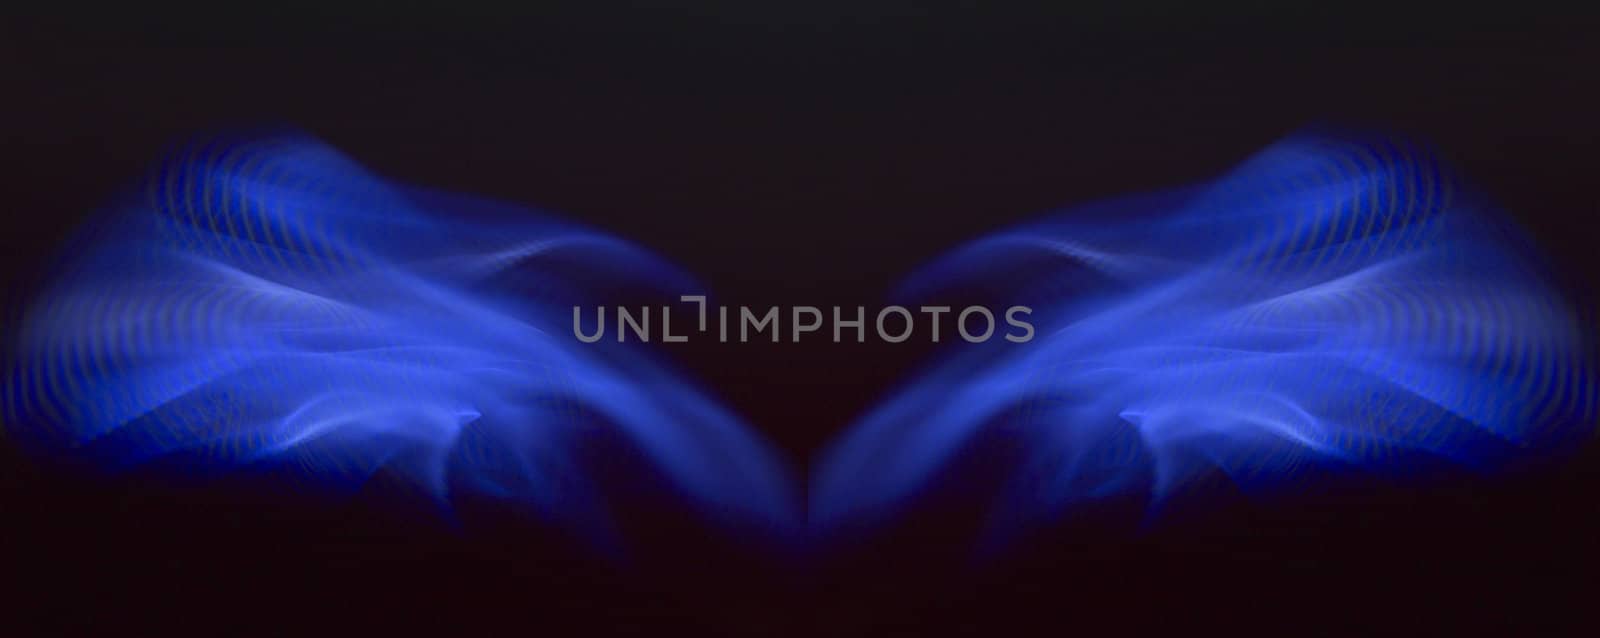 stock image - abstract background with flowing shapes